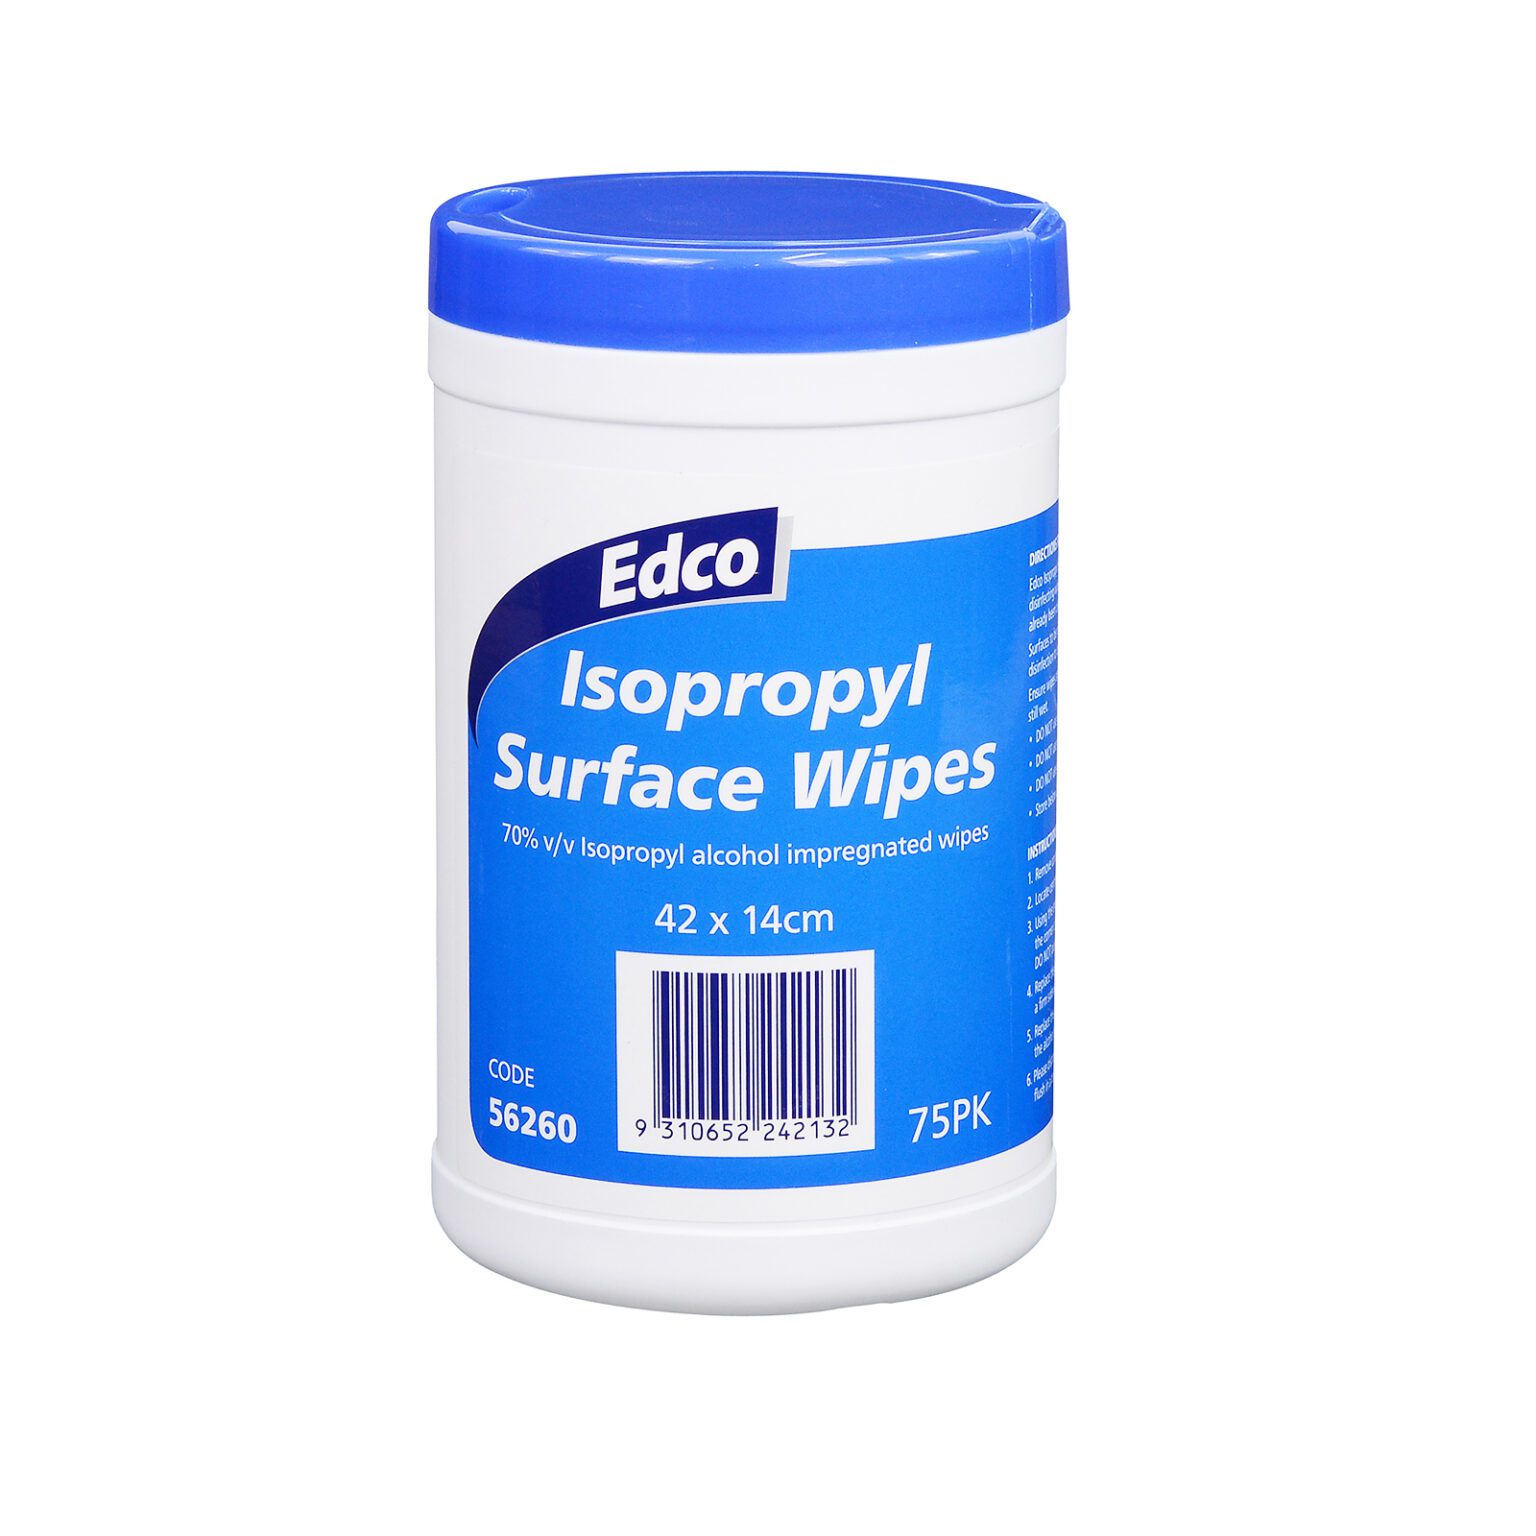 56260-Edco-Isopropyl-Surface-Wipes-Cannister-75pk-Front